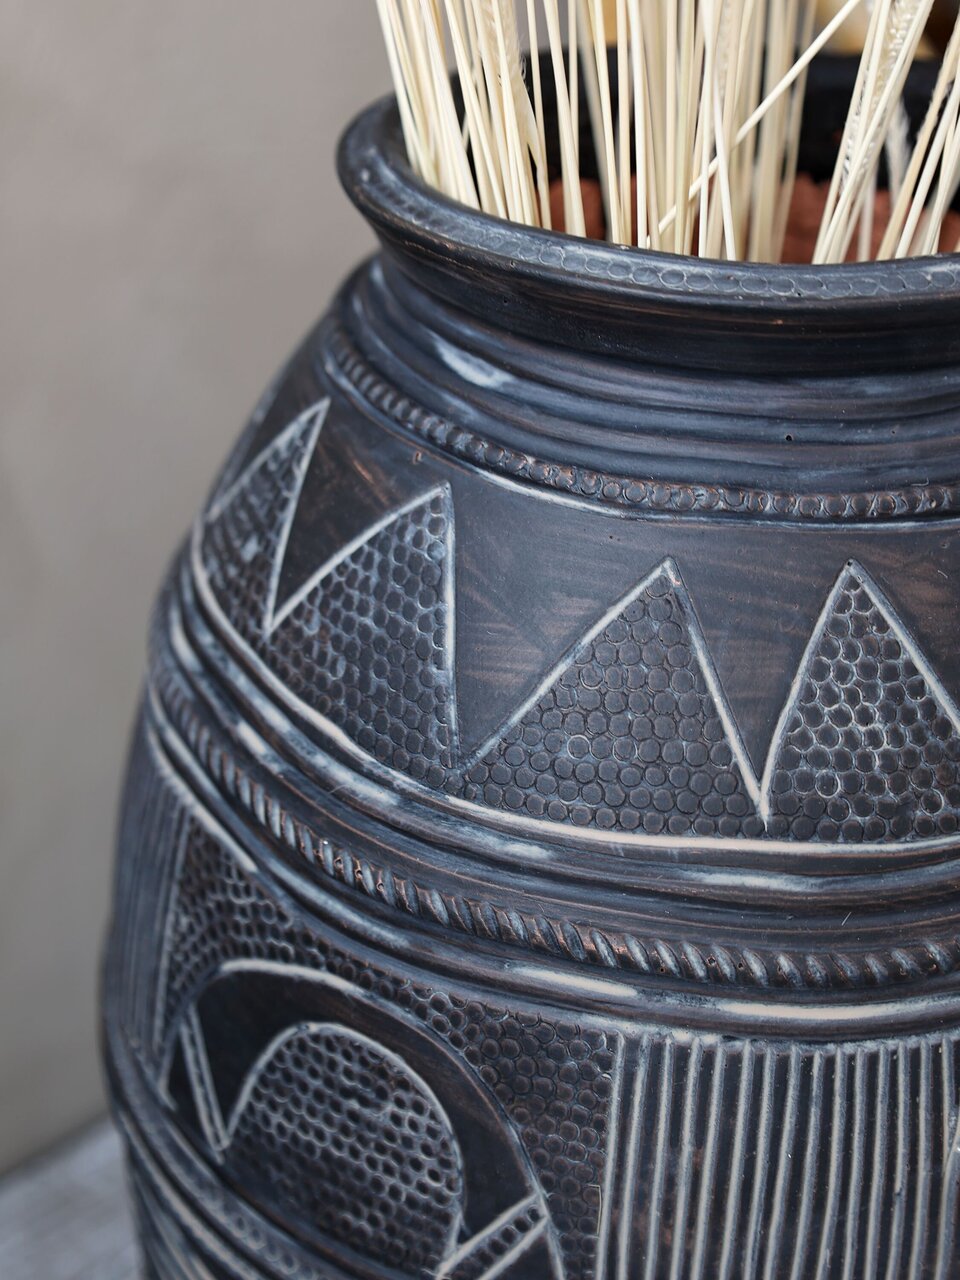 Chic Antique Antike Vase mit Muster Preview Image